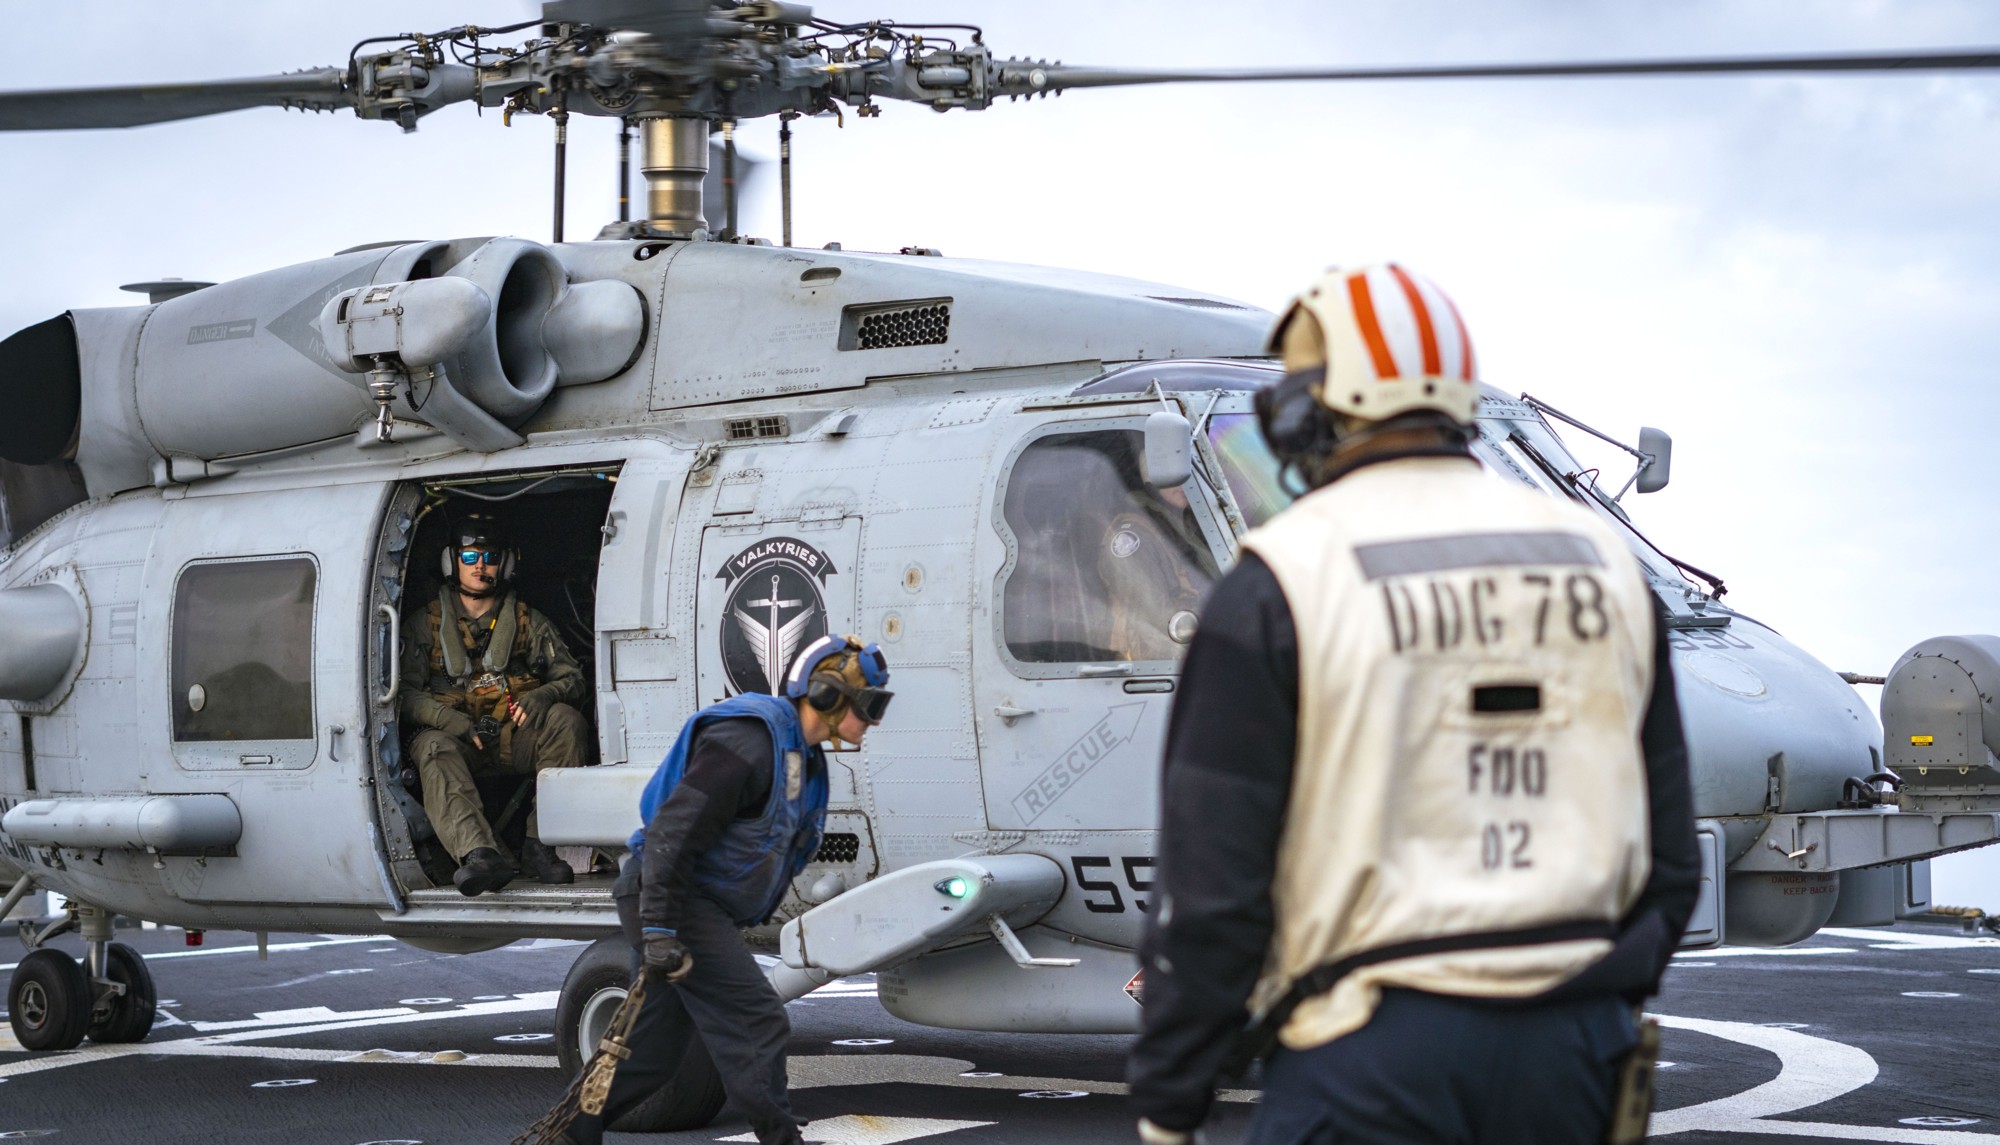 hsm-50 valkyries helicopter maritime strike squadron us navy mh-60r seahawk ddg-78 uss porter 06